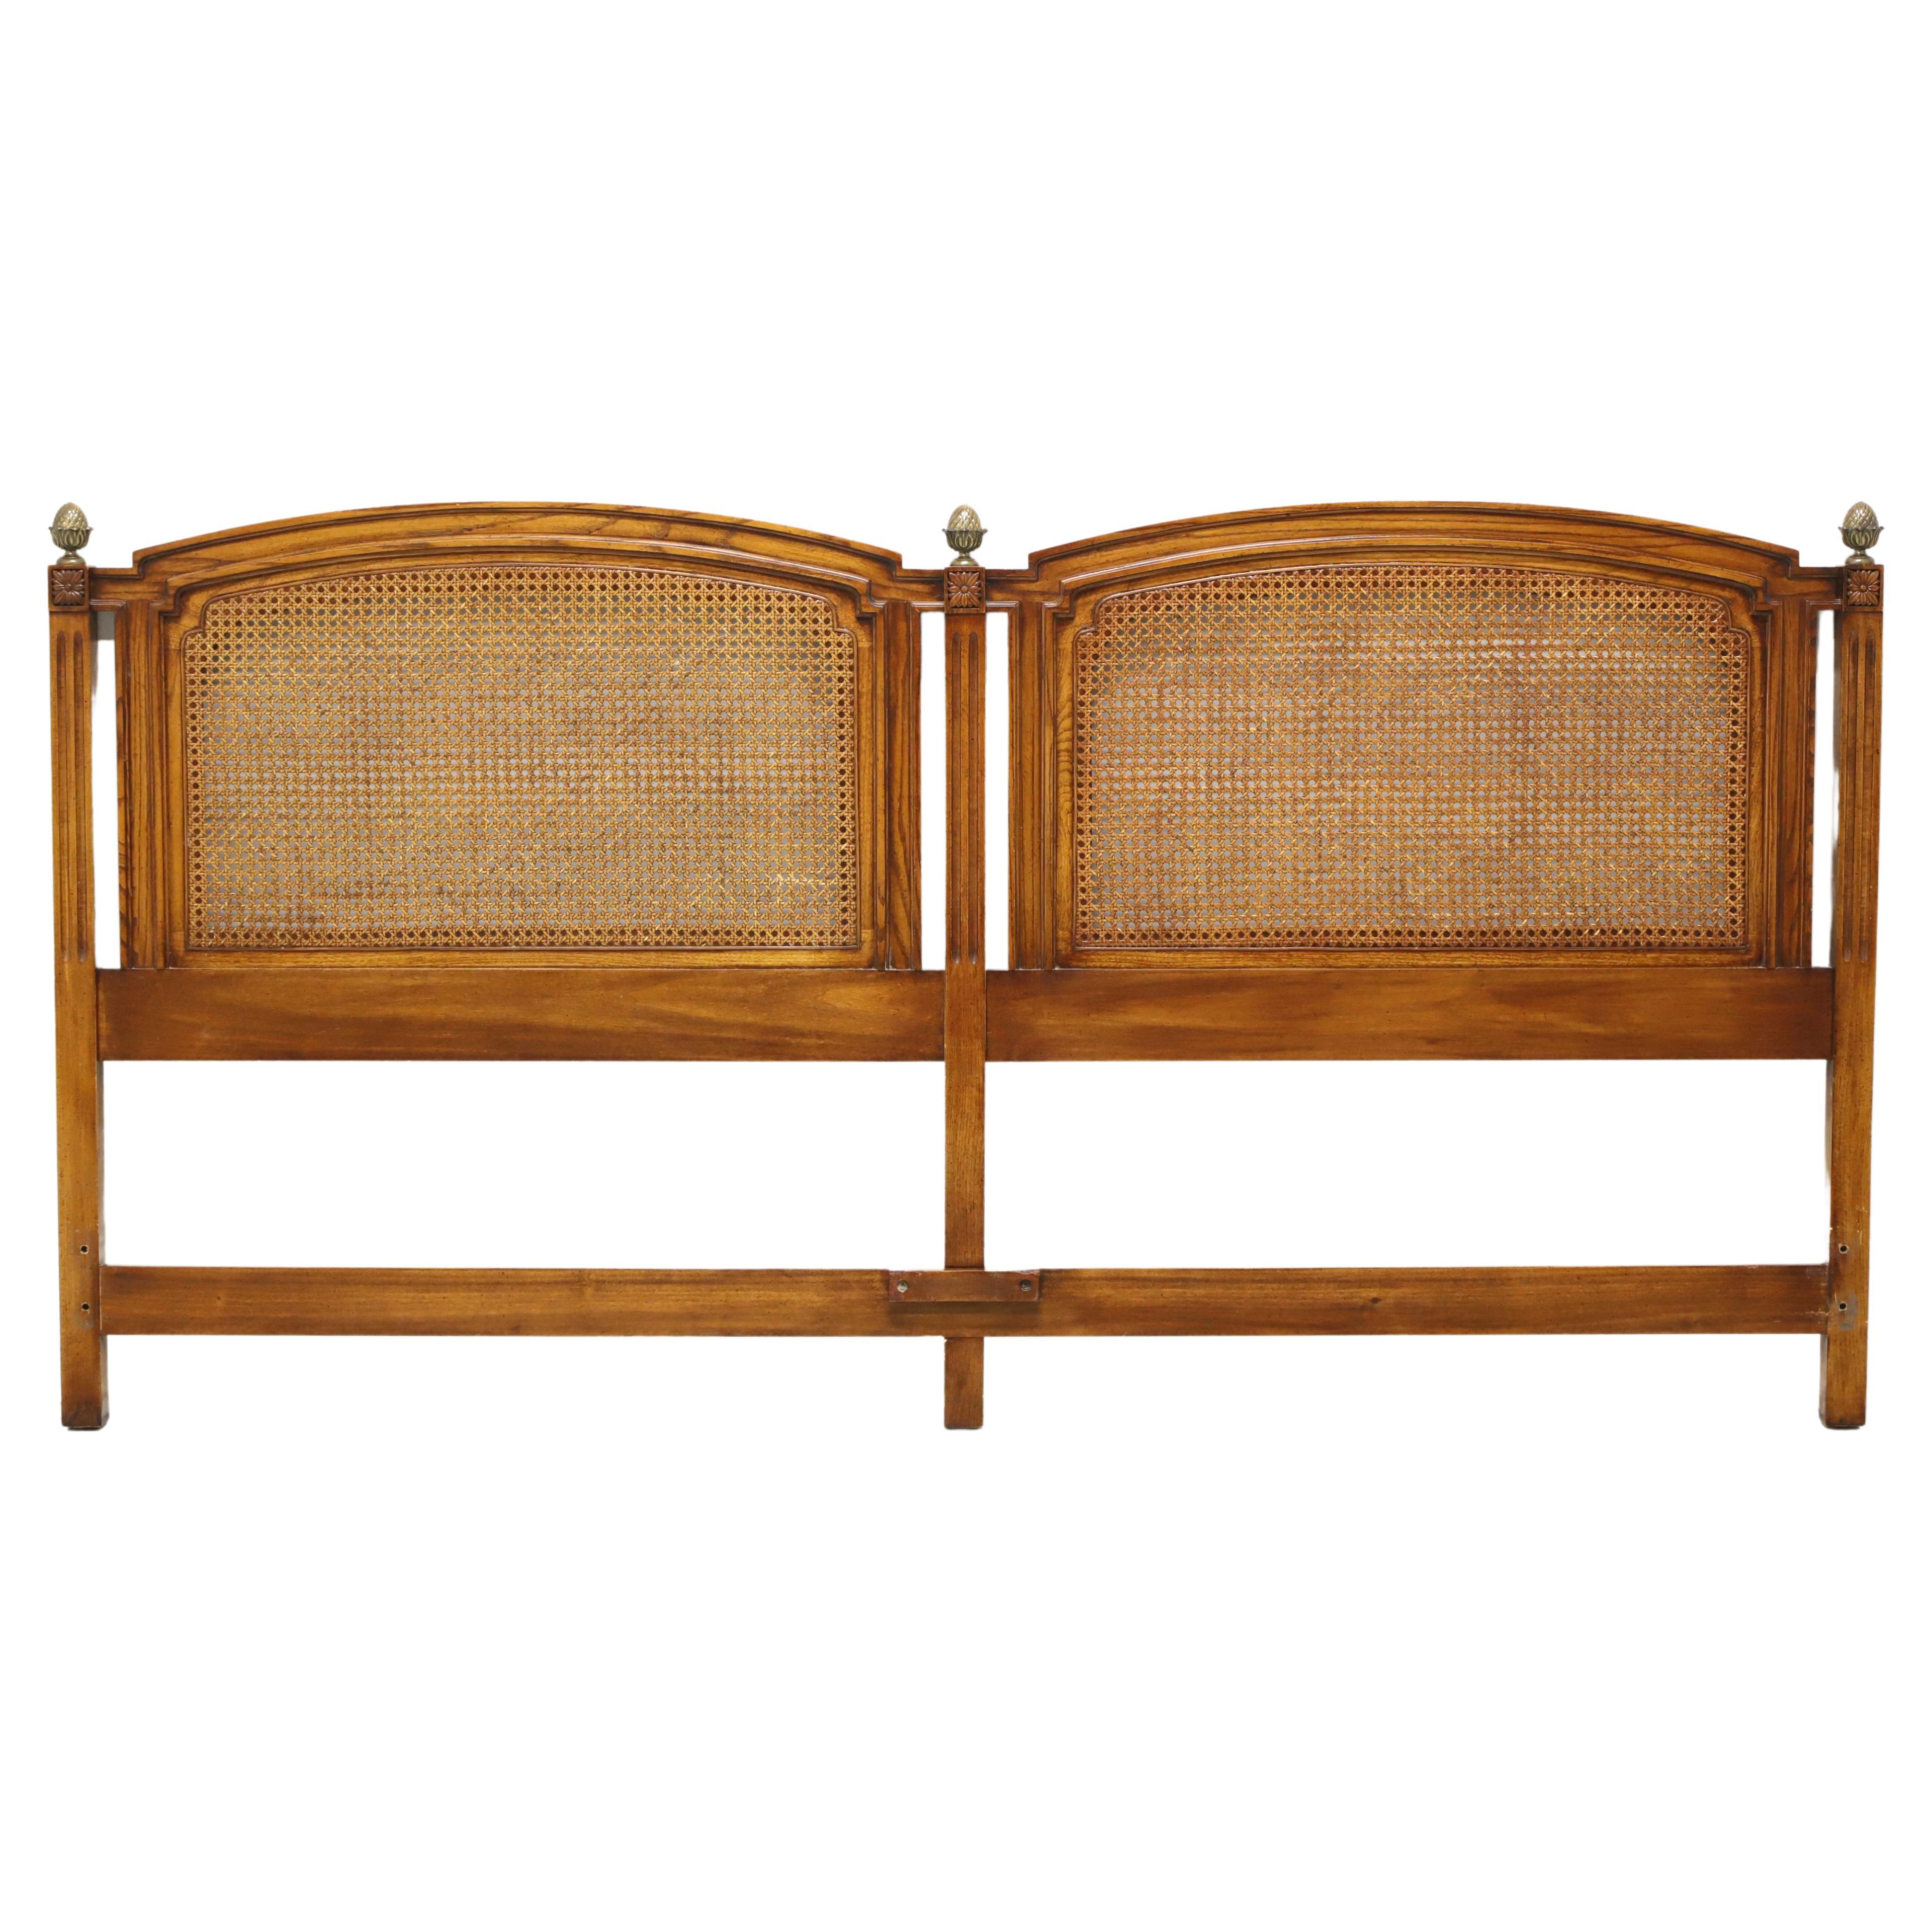 Vintage Mid-20th Century King Size Caned Headboard by WHITE of Mebane